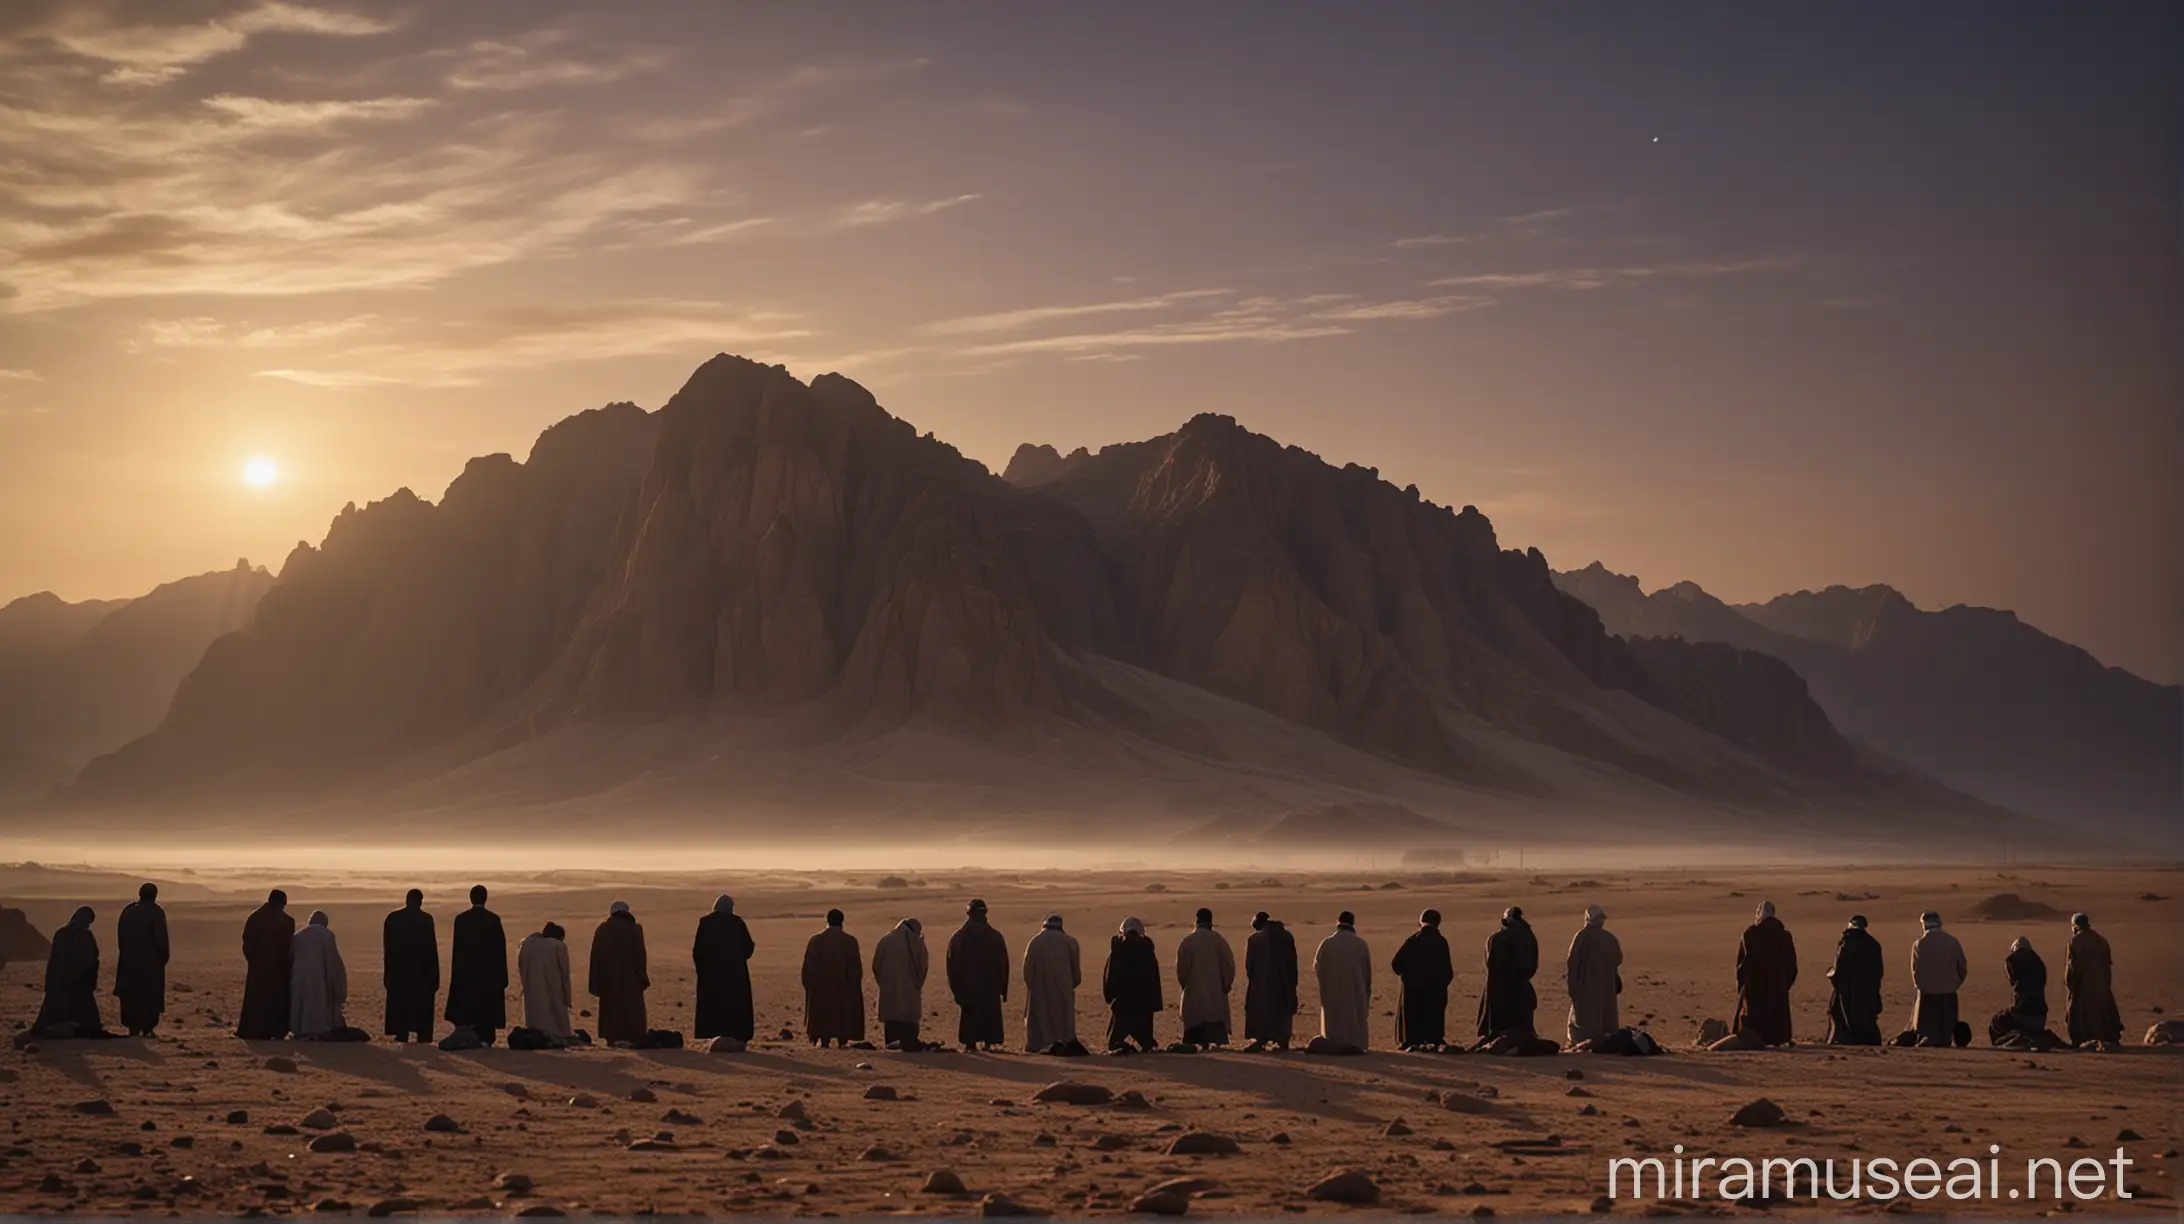 Scene Description: An ancient, dramatic desert landscape at dusk with a single, towering mountain in the background. At the base of the mountain, a group of people are shown bowing in prayer, signifying submission to Allah. In contrast, one lone figure stands defiantly, facing away from the group, symbolizing the act of challenging Allah.
Key Elements: Desert, mountain, dusk sky, group in prayer, lone defiant figure.
Mood/Theme: Contrast between submission and defiance, spiritual gravity, and consequences.